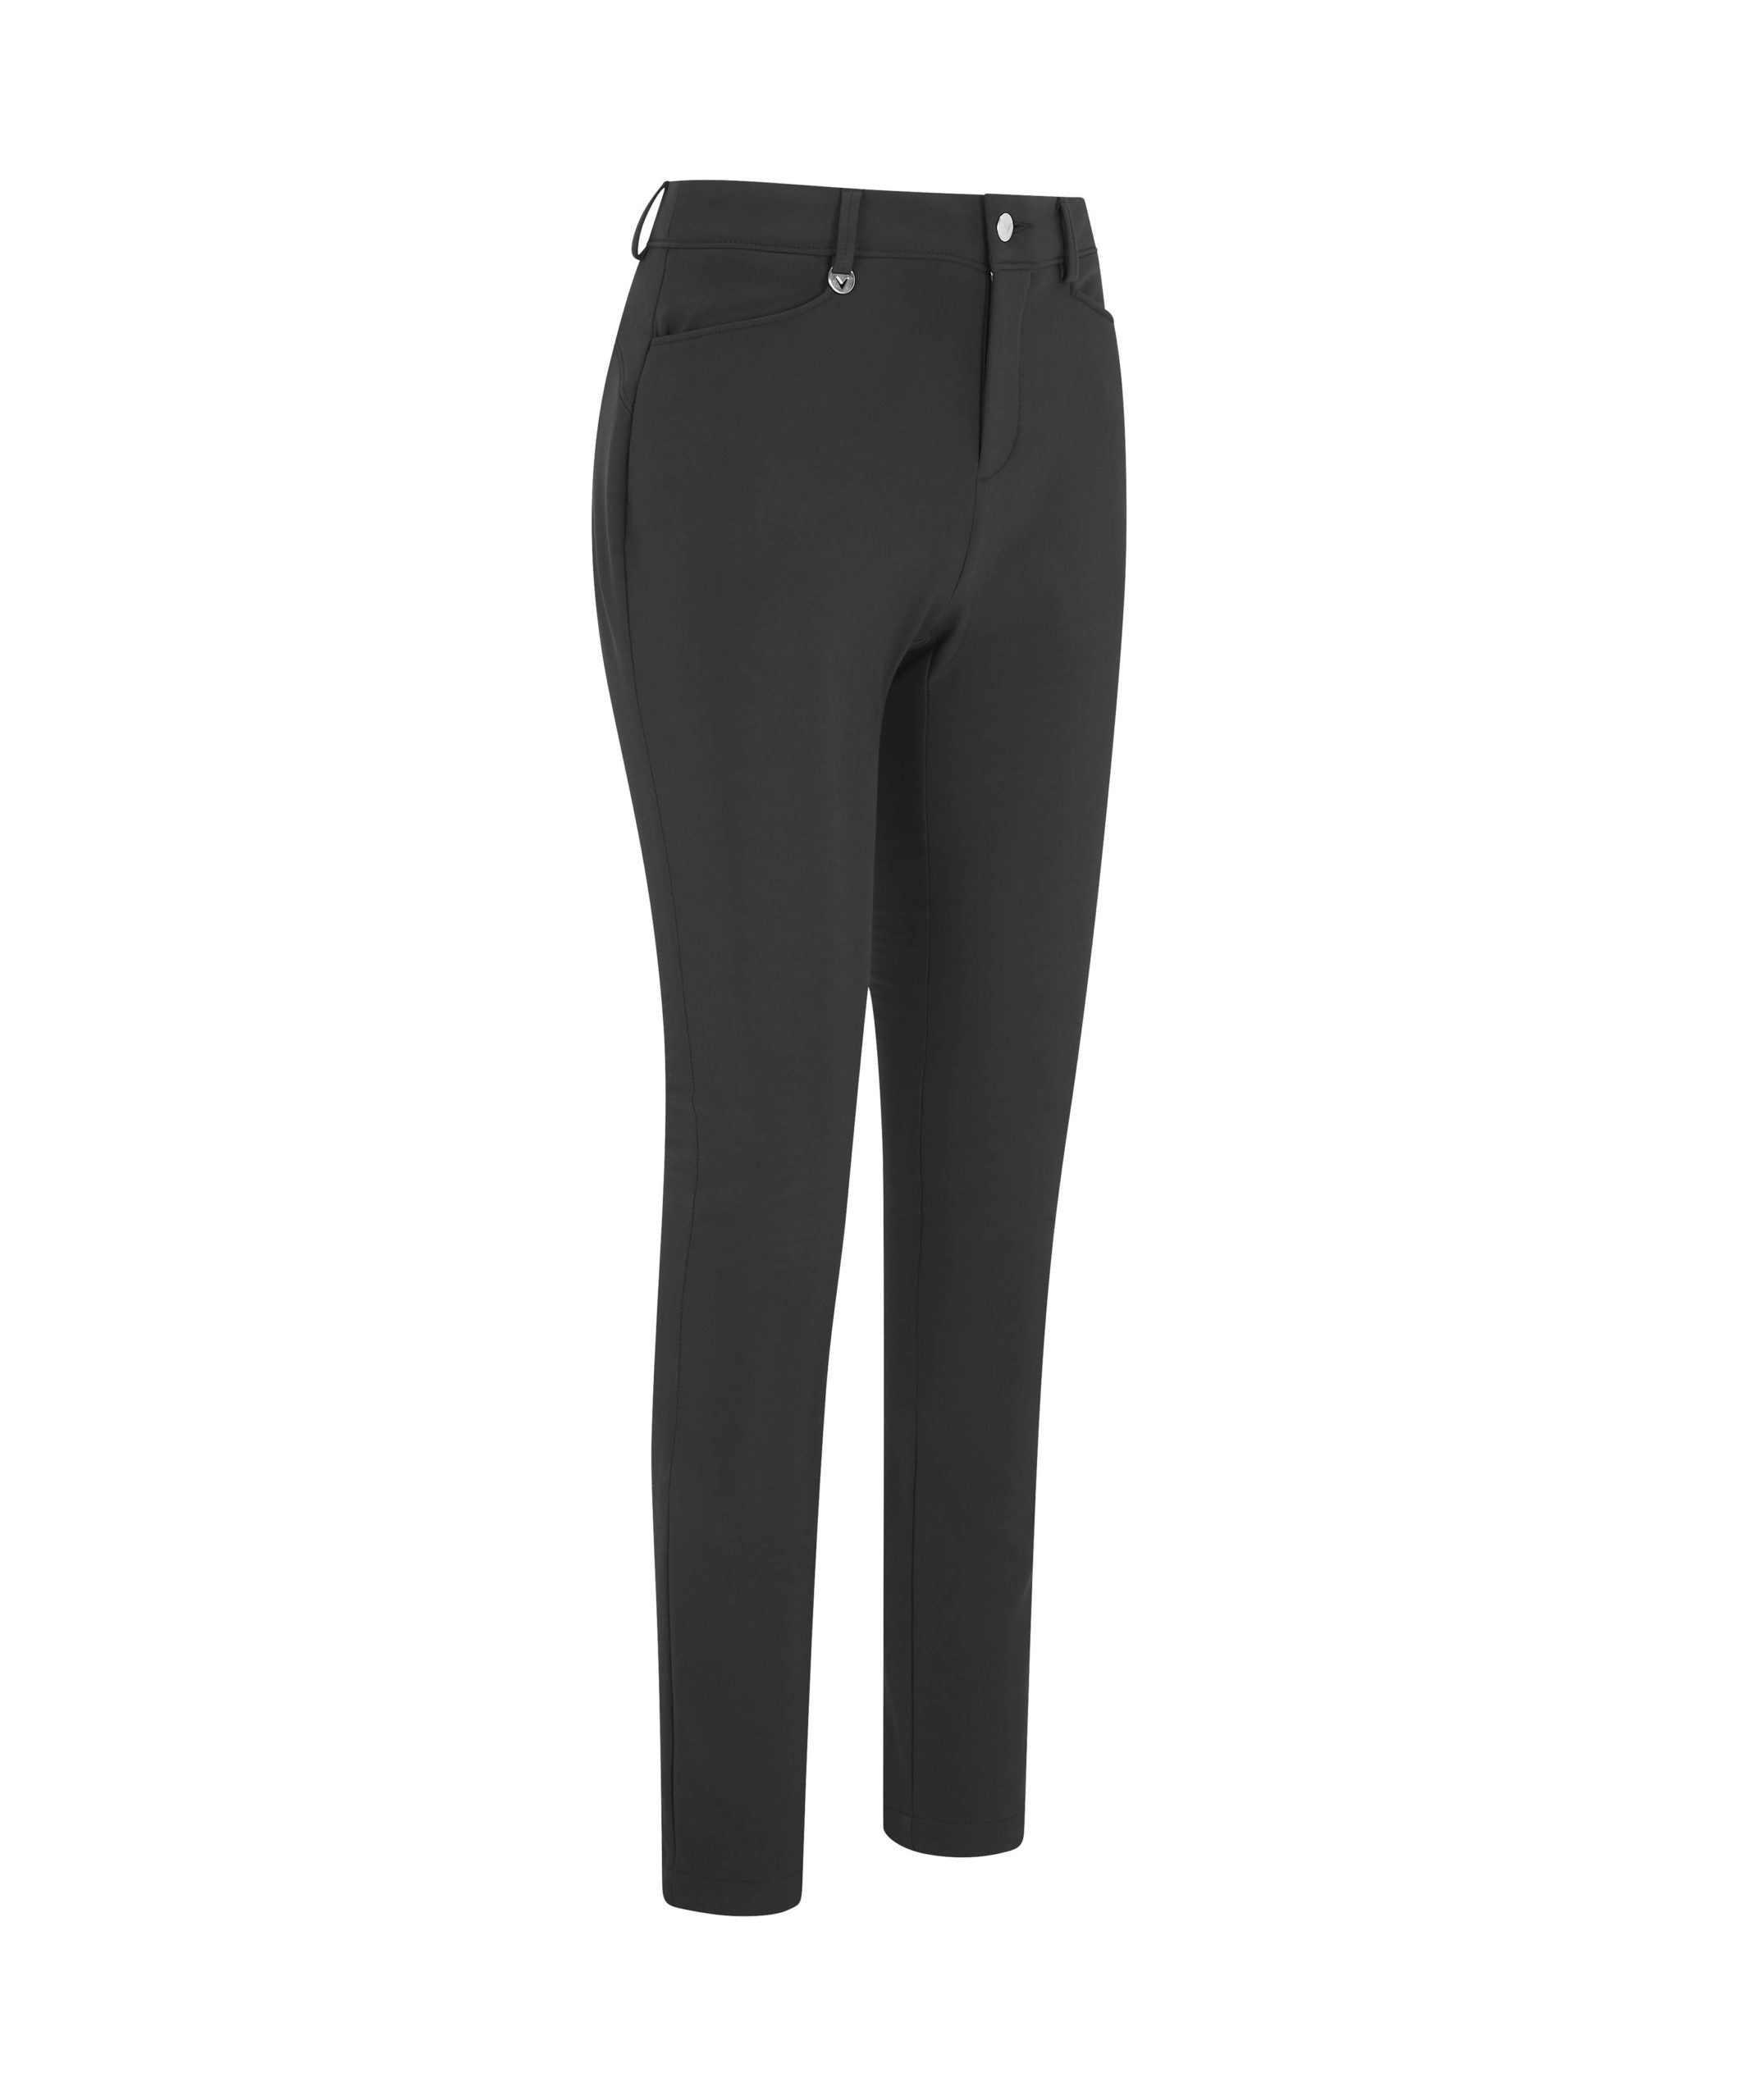 View Thermal Trousers In Caviar information